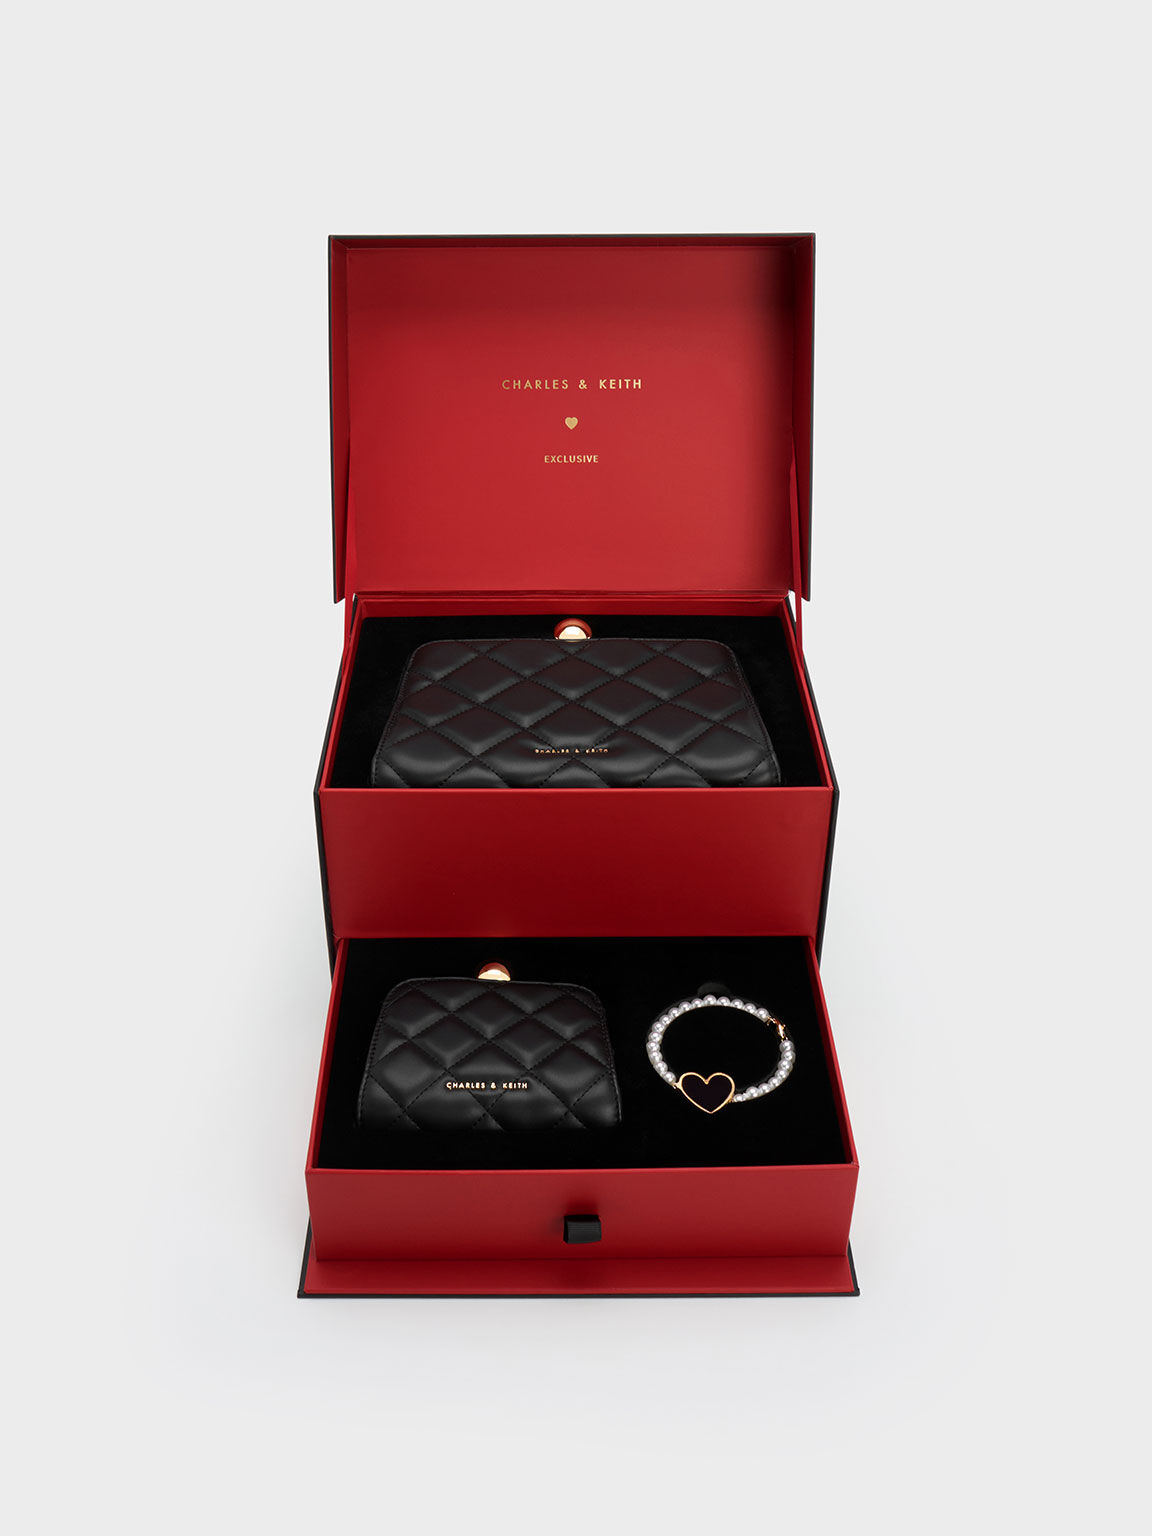 Gift Set: Mini Quilted Chain Bag, Black, hi-res